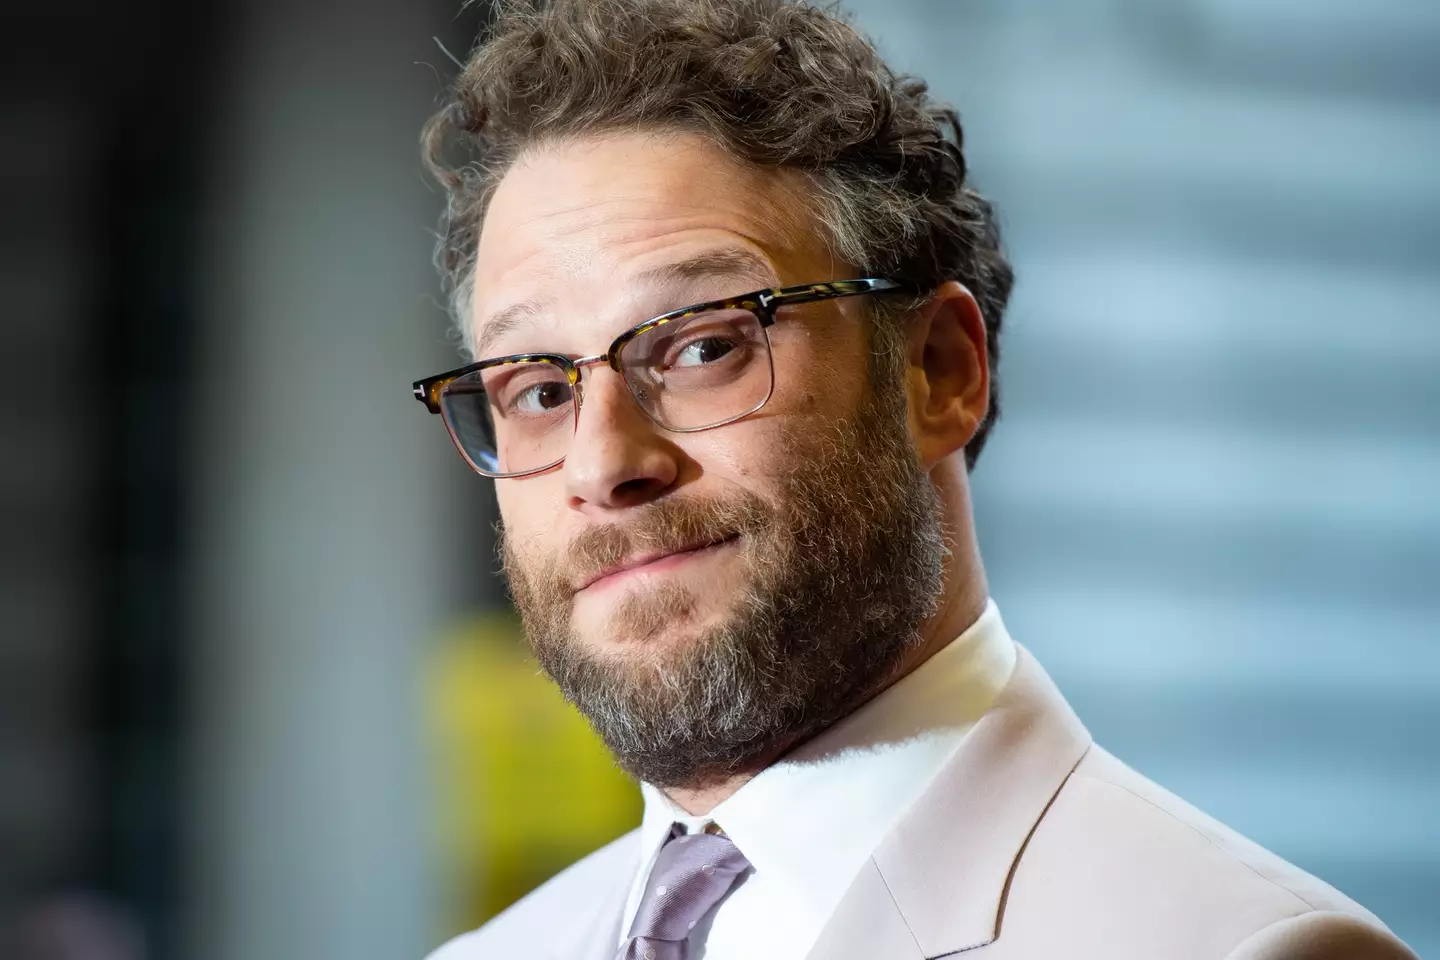 Fans described Rogen as a 'king' when he showed off his nails.